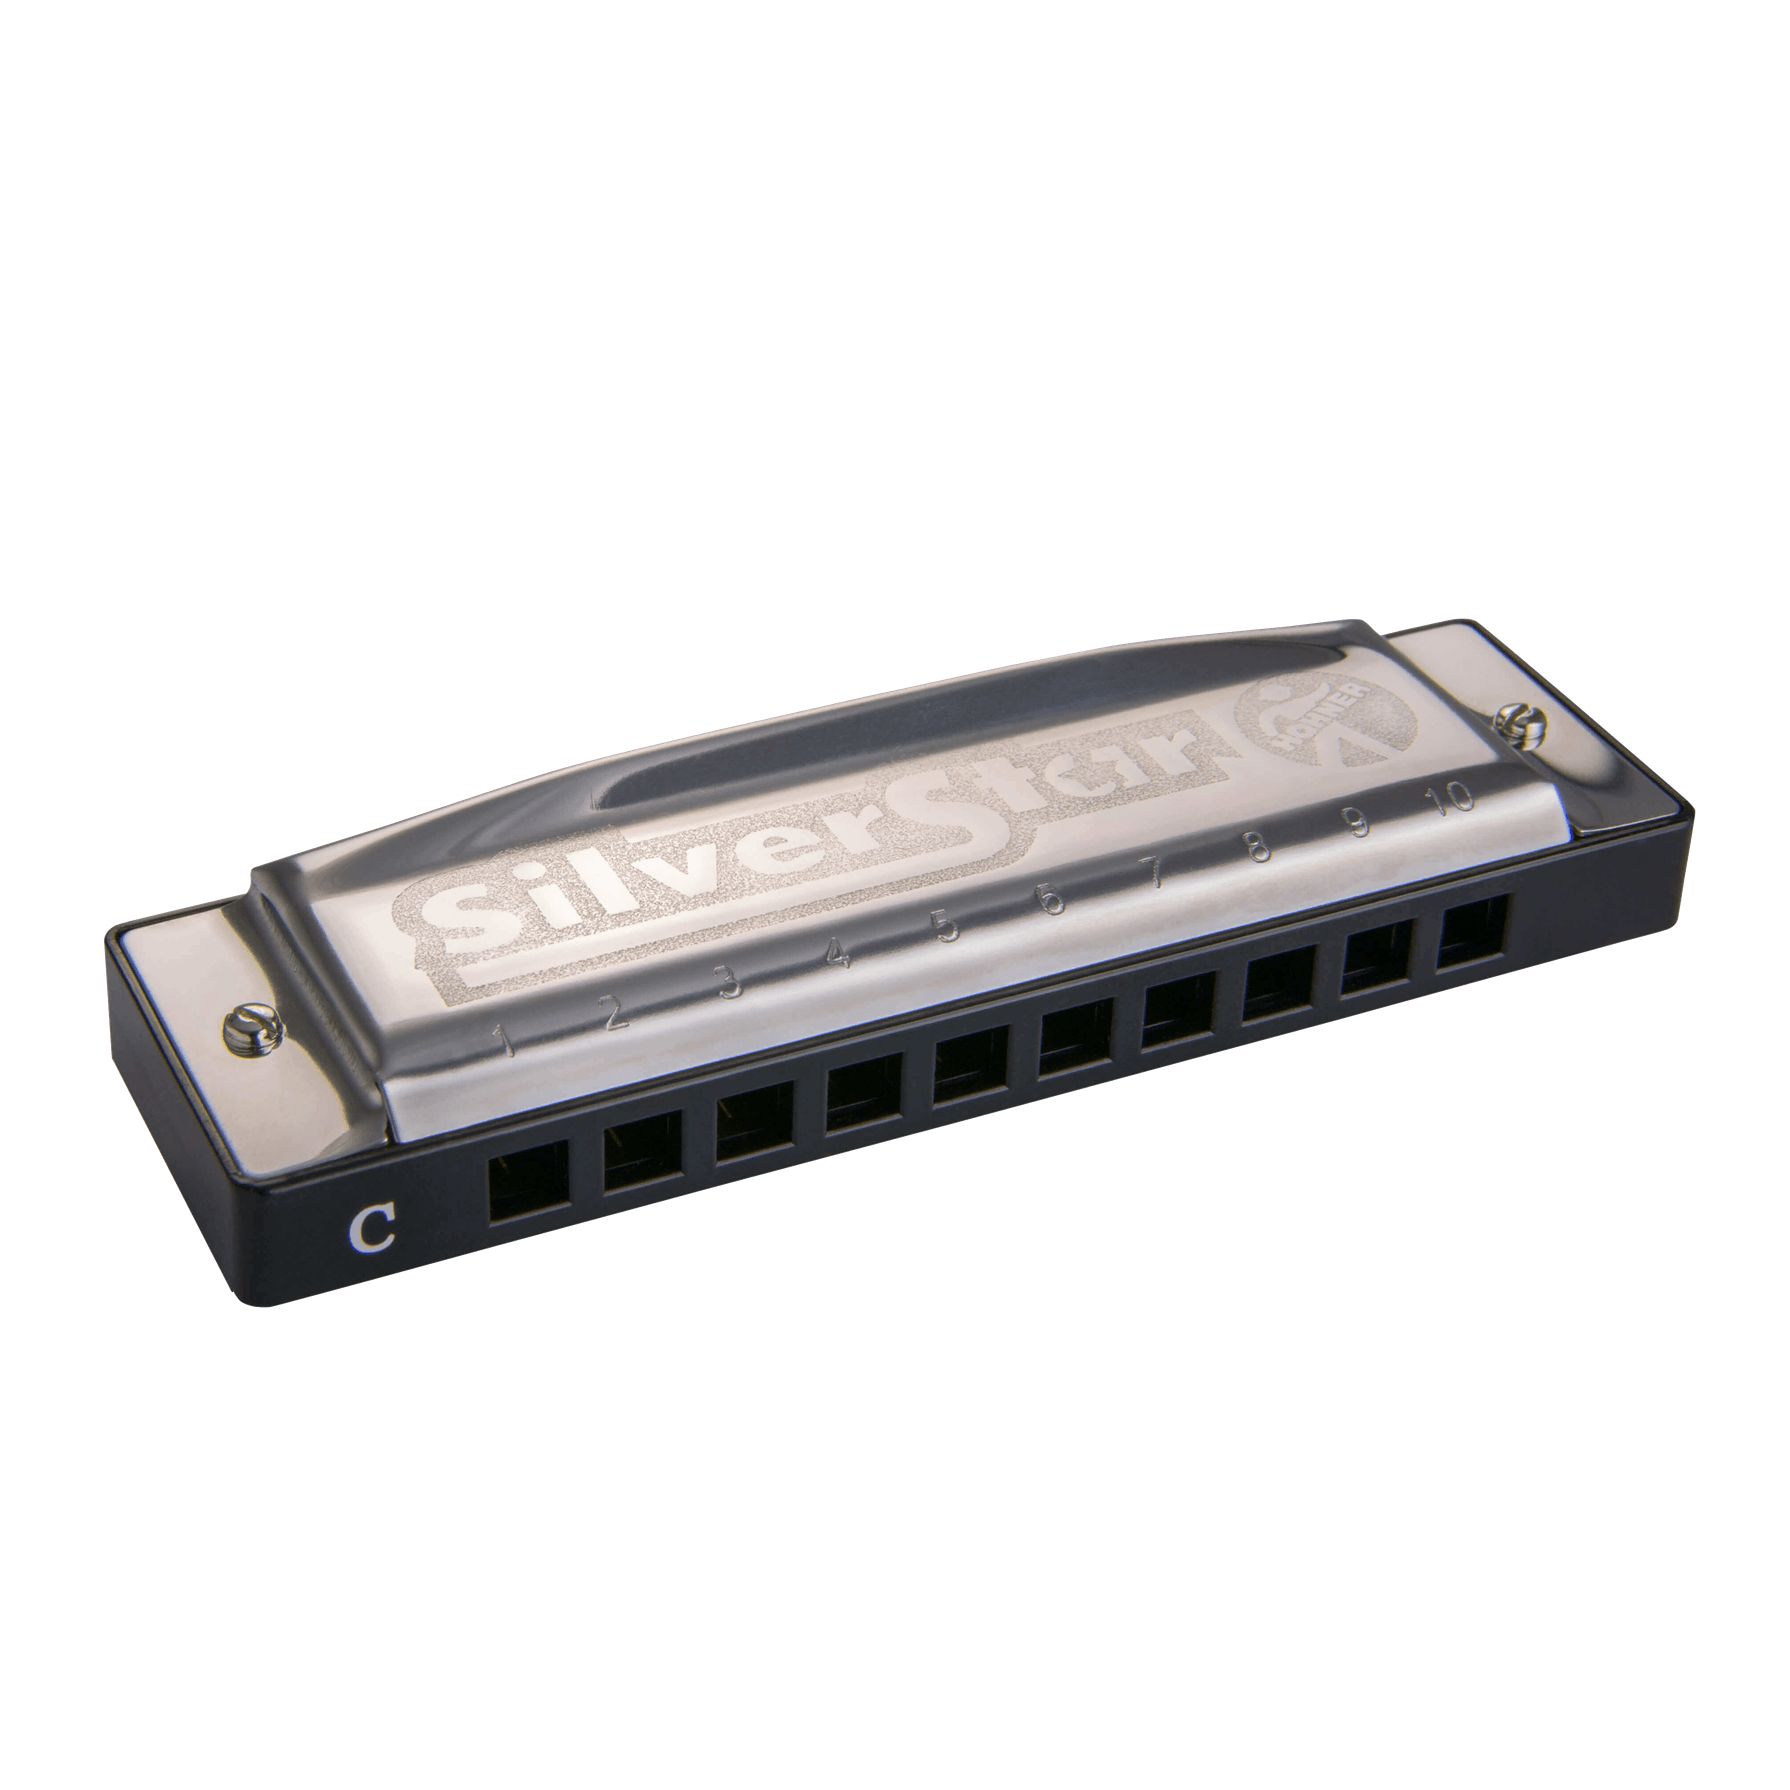 E Harmonica 504/20 - Harmonicas by Hohner at Muso's Stuff